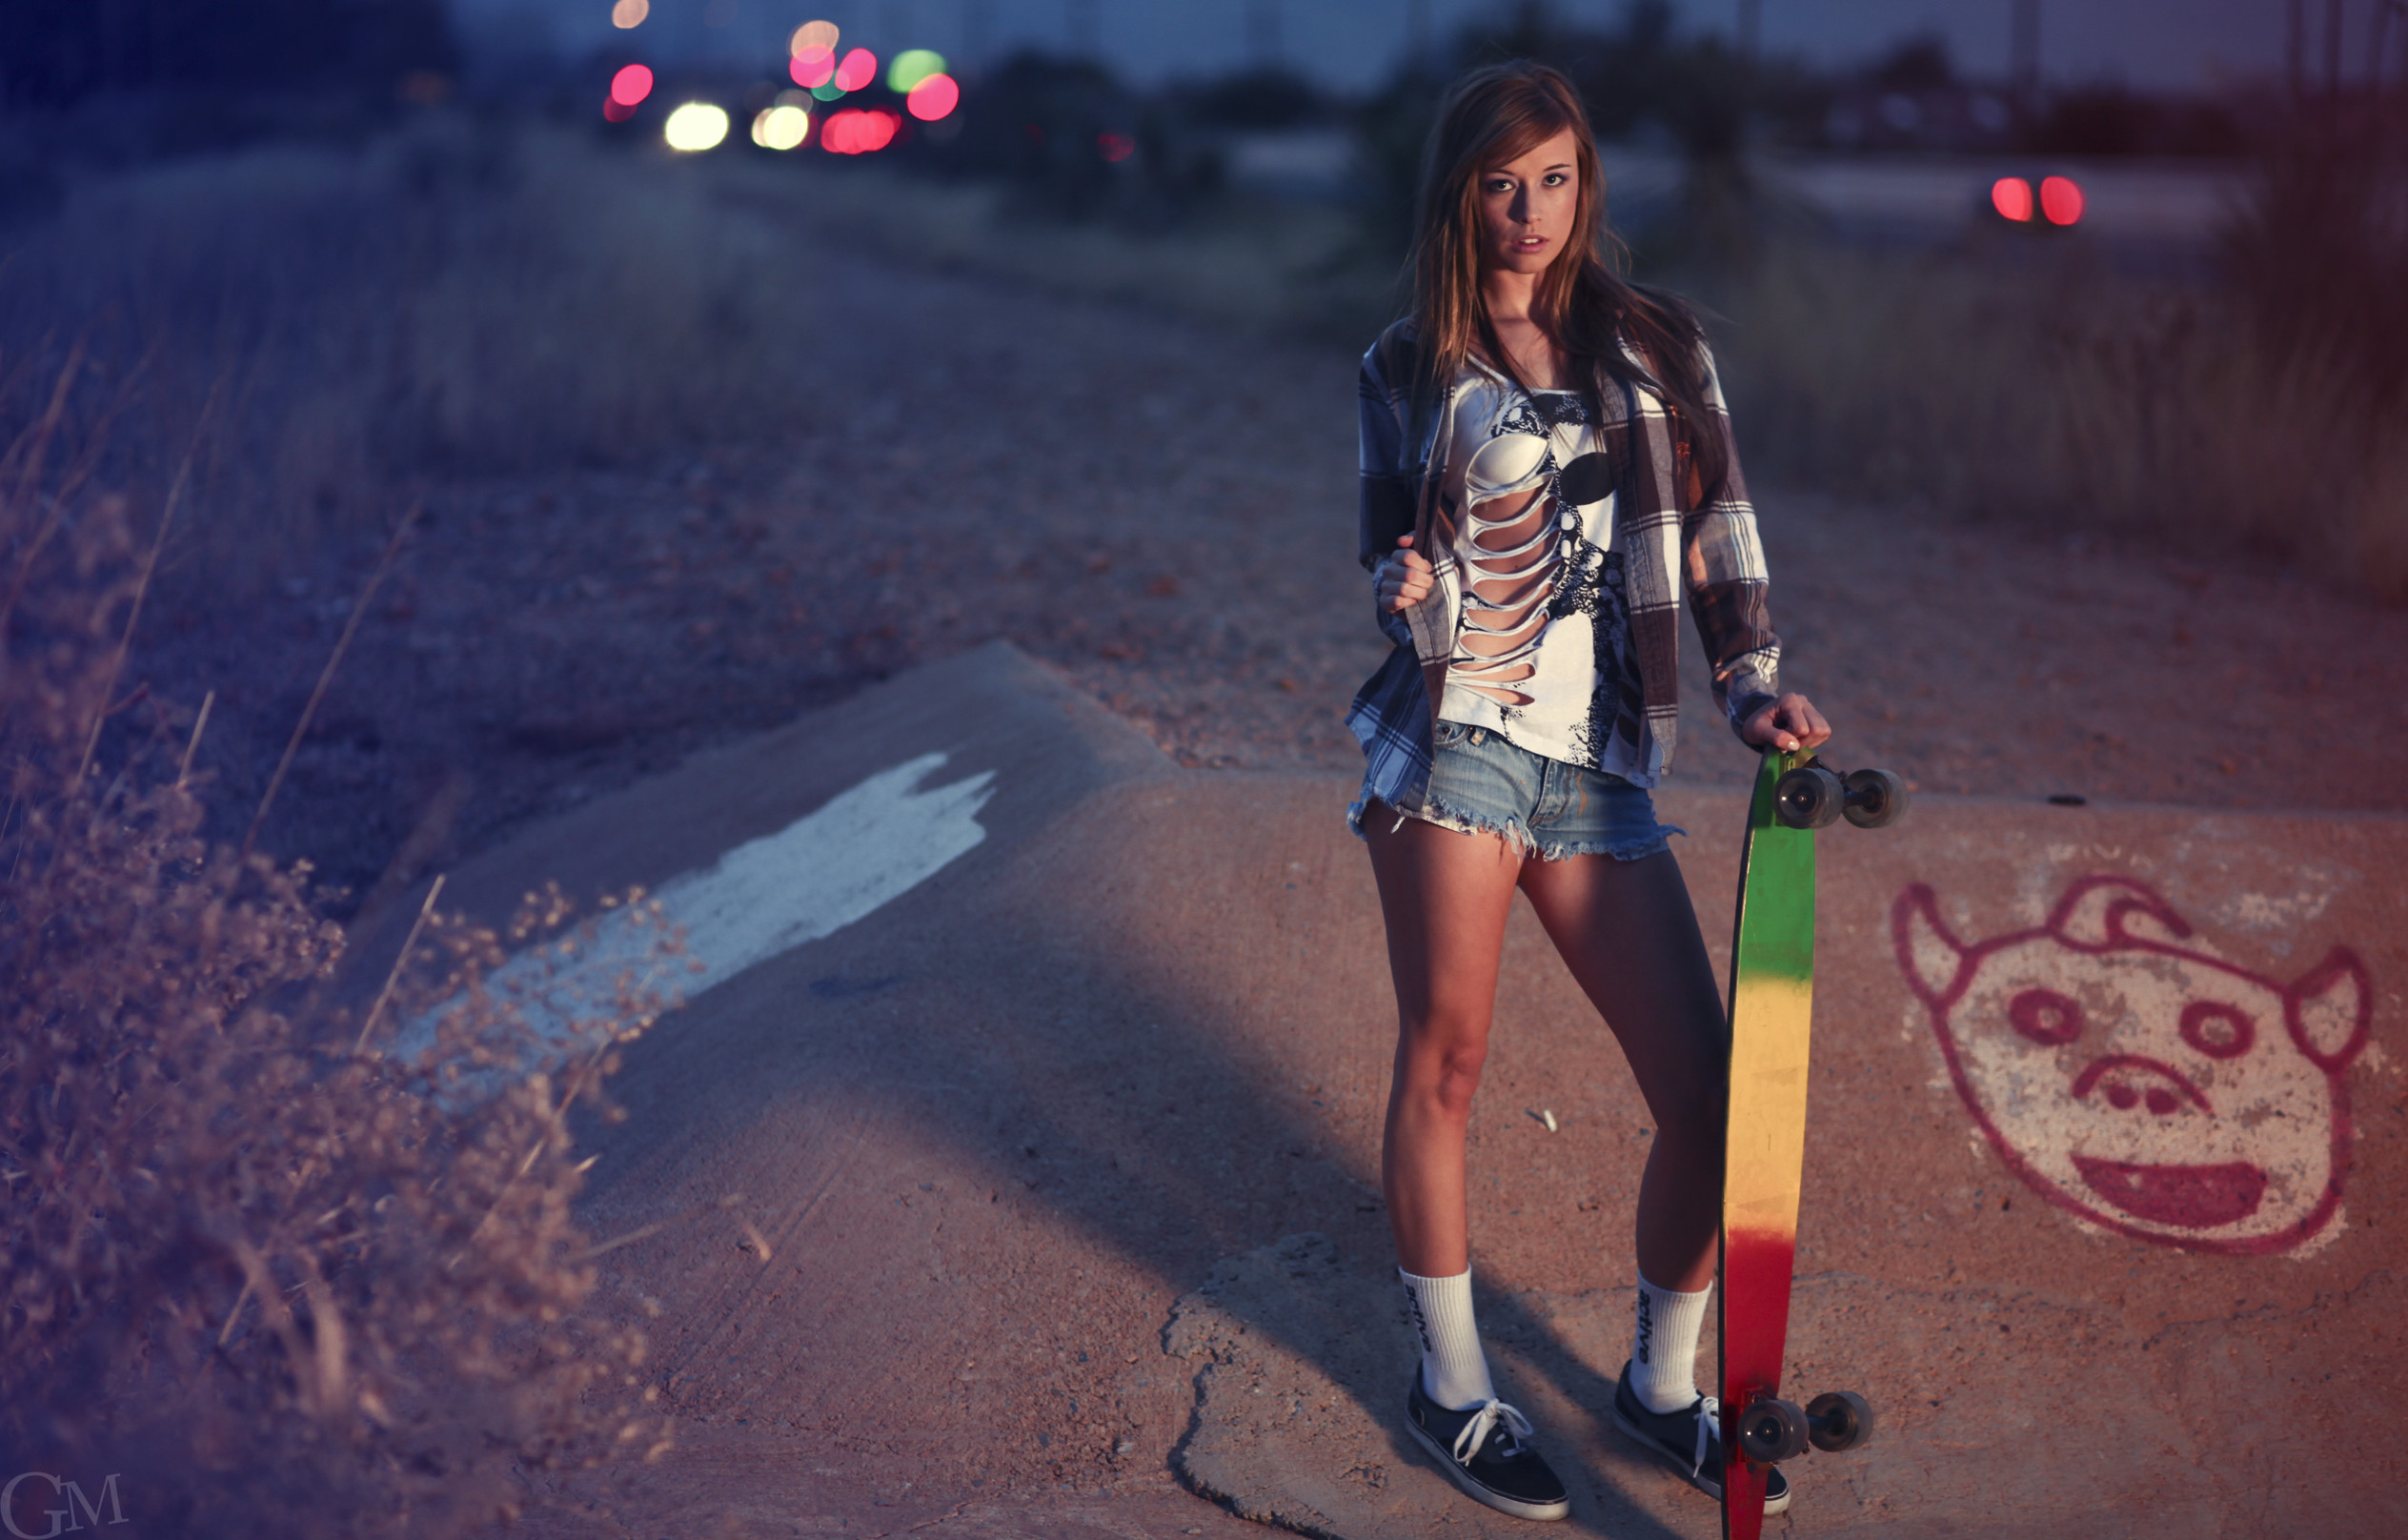 2527x1616 Skater girl wallpapers and images - wallpapers, pictures, photos